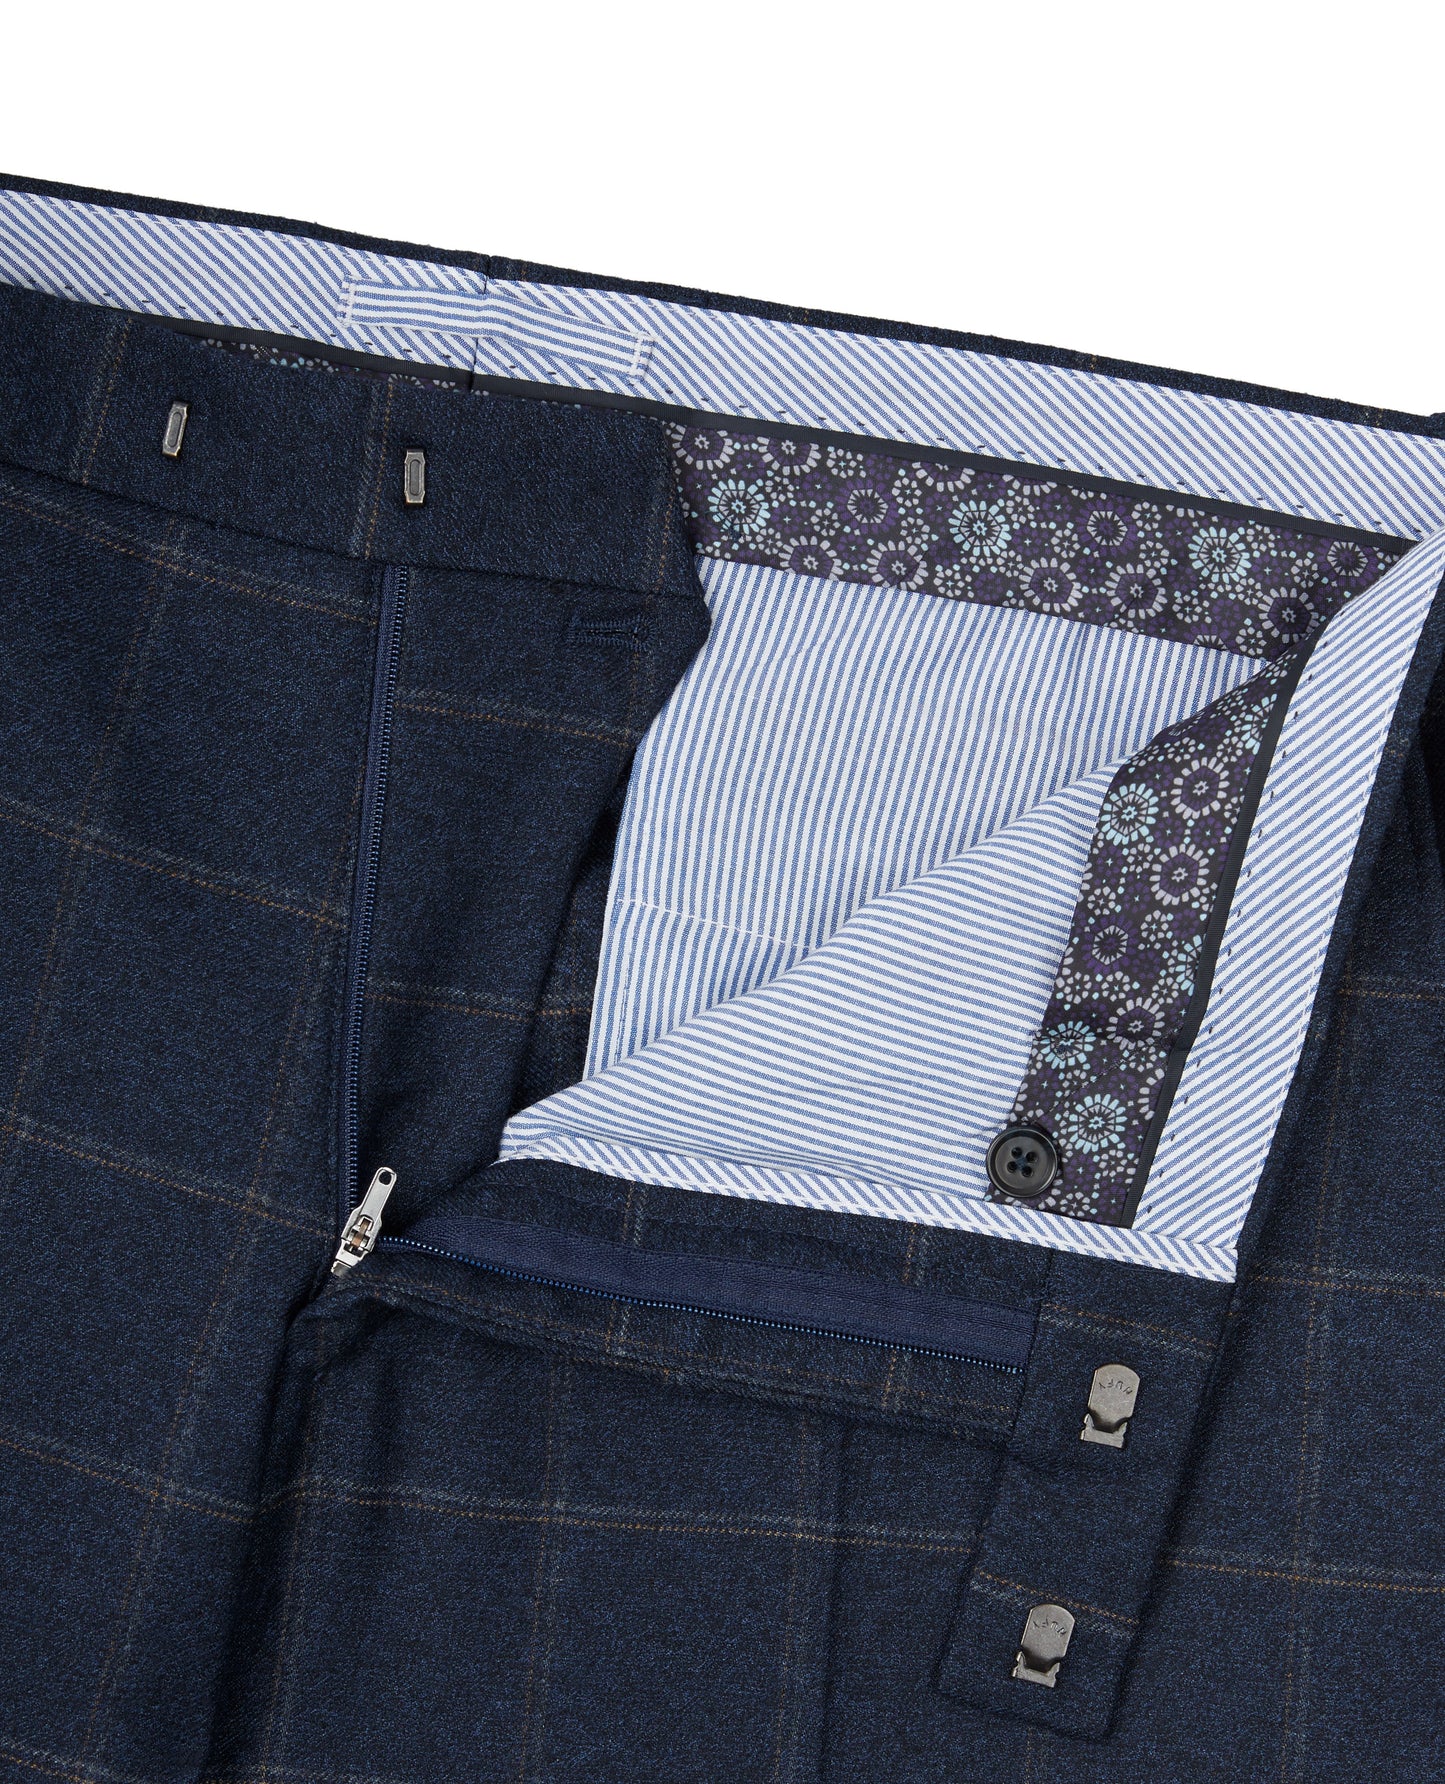 Image 2 of Jubilee Wool Silk Cashmere Slim Fit Navy and Beige Check Trousers